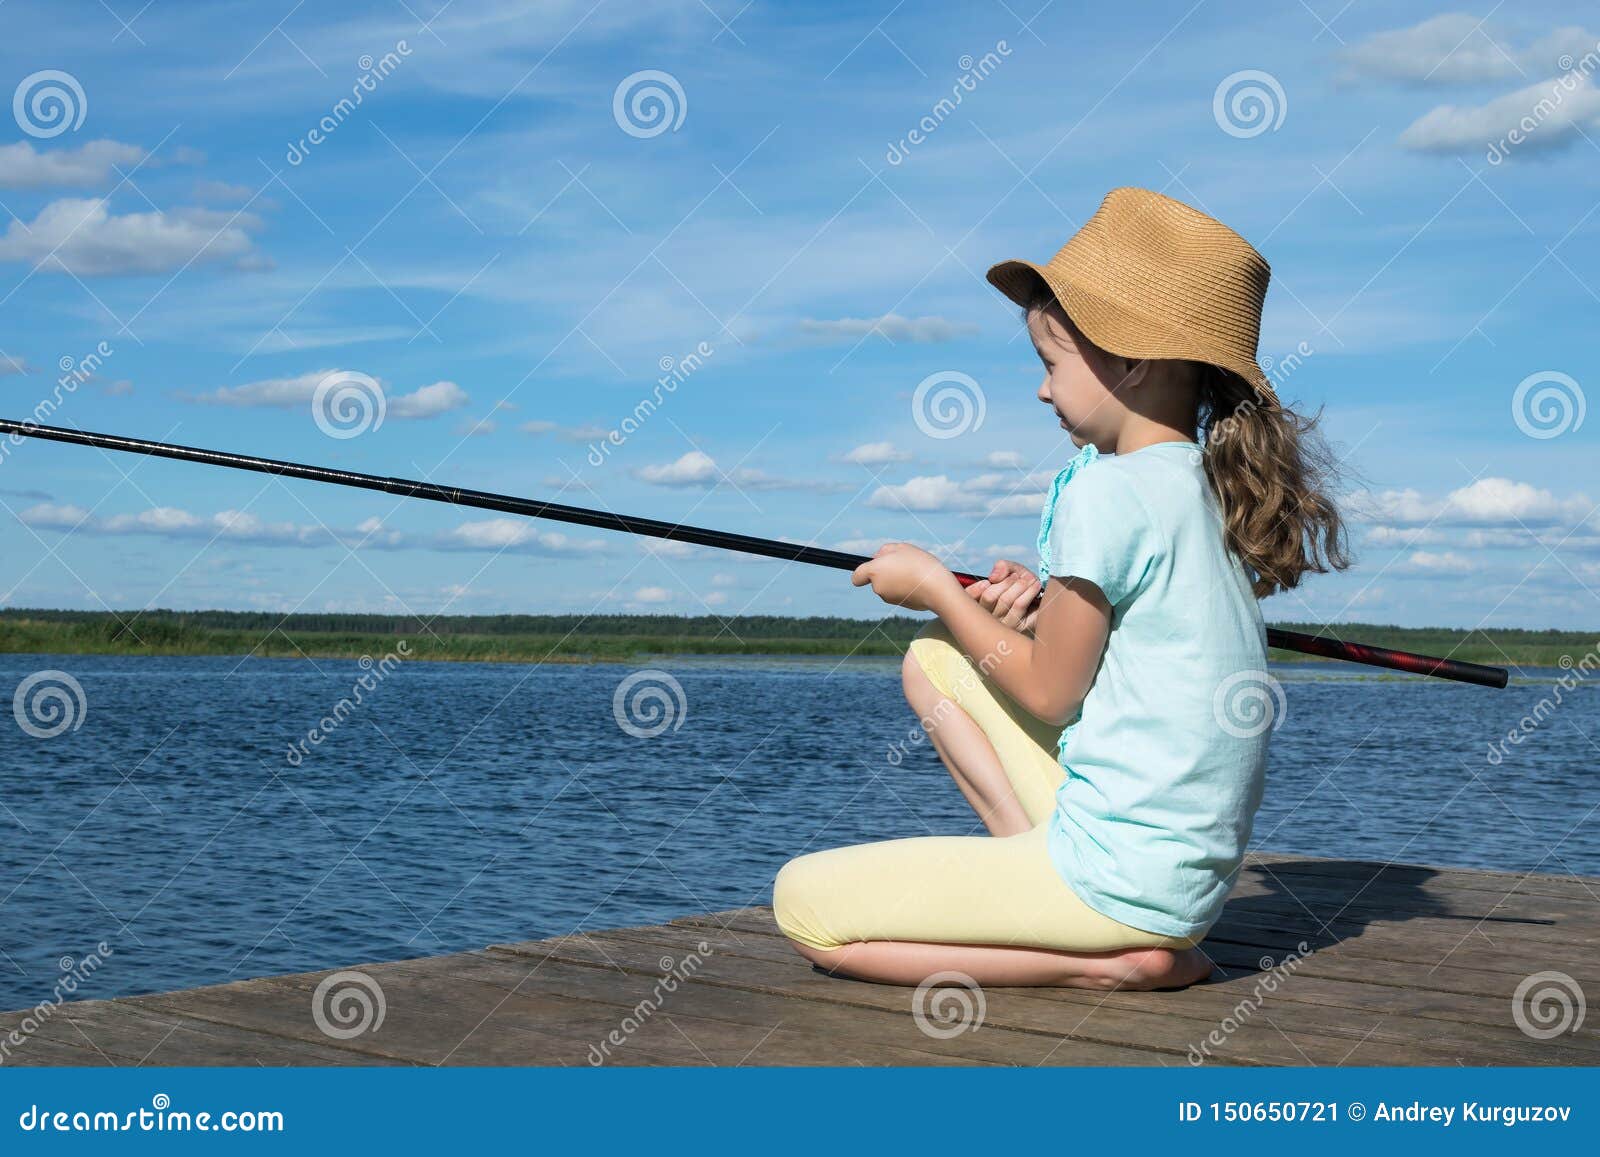 Little Girl with a Hat is Fishing on a Lake on a Sunny Day Stock